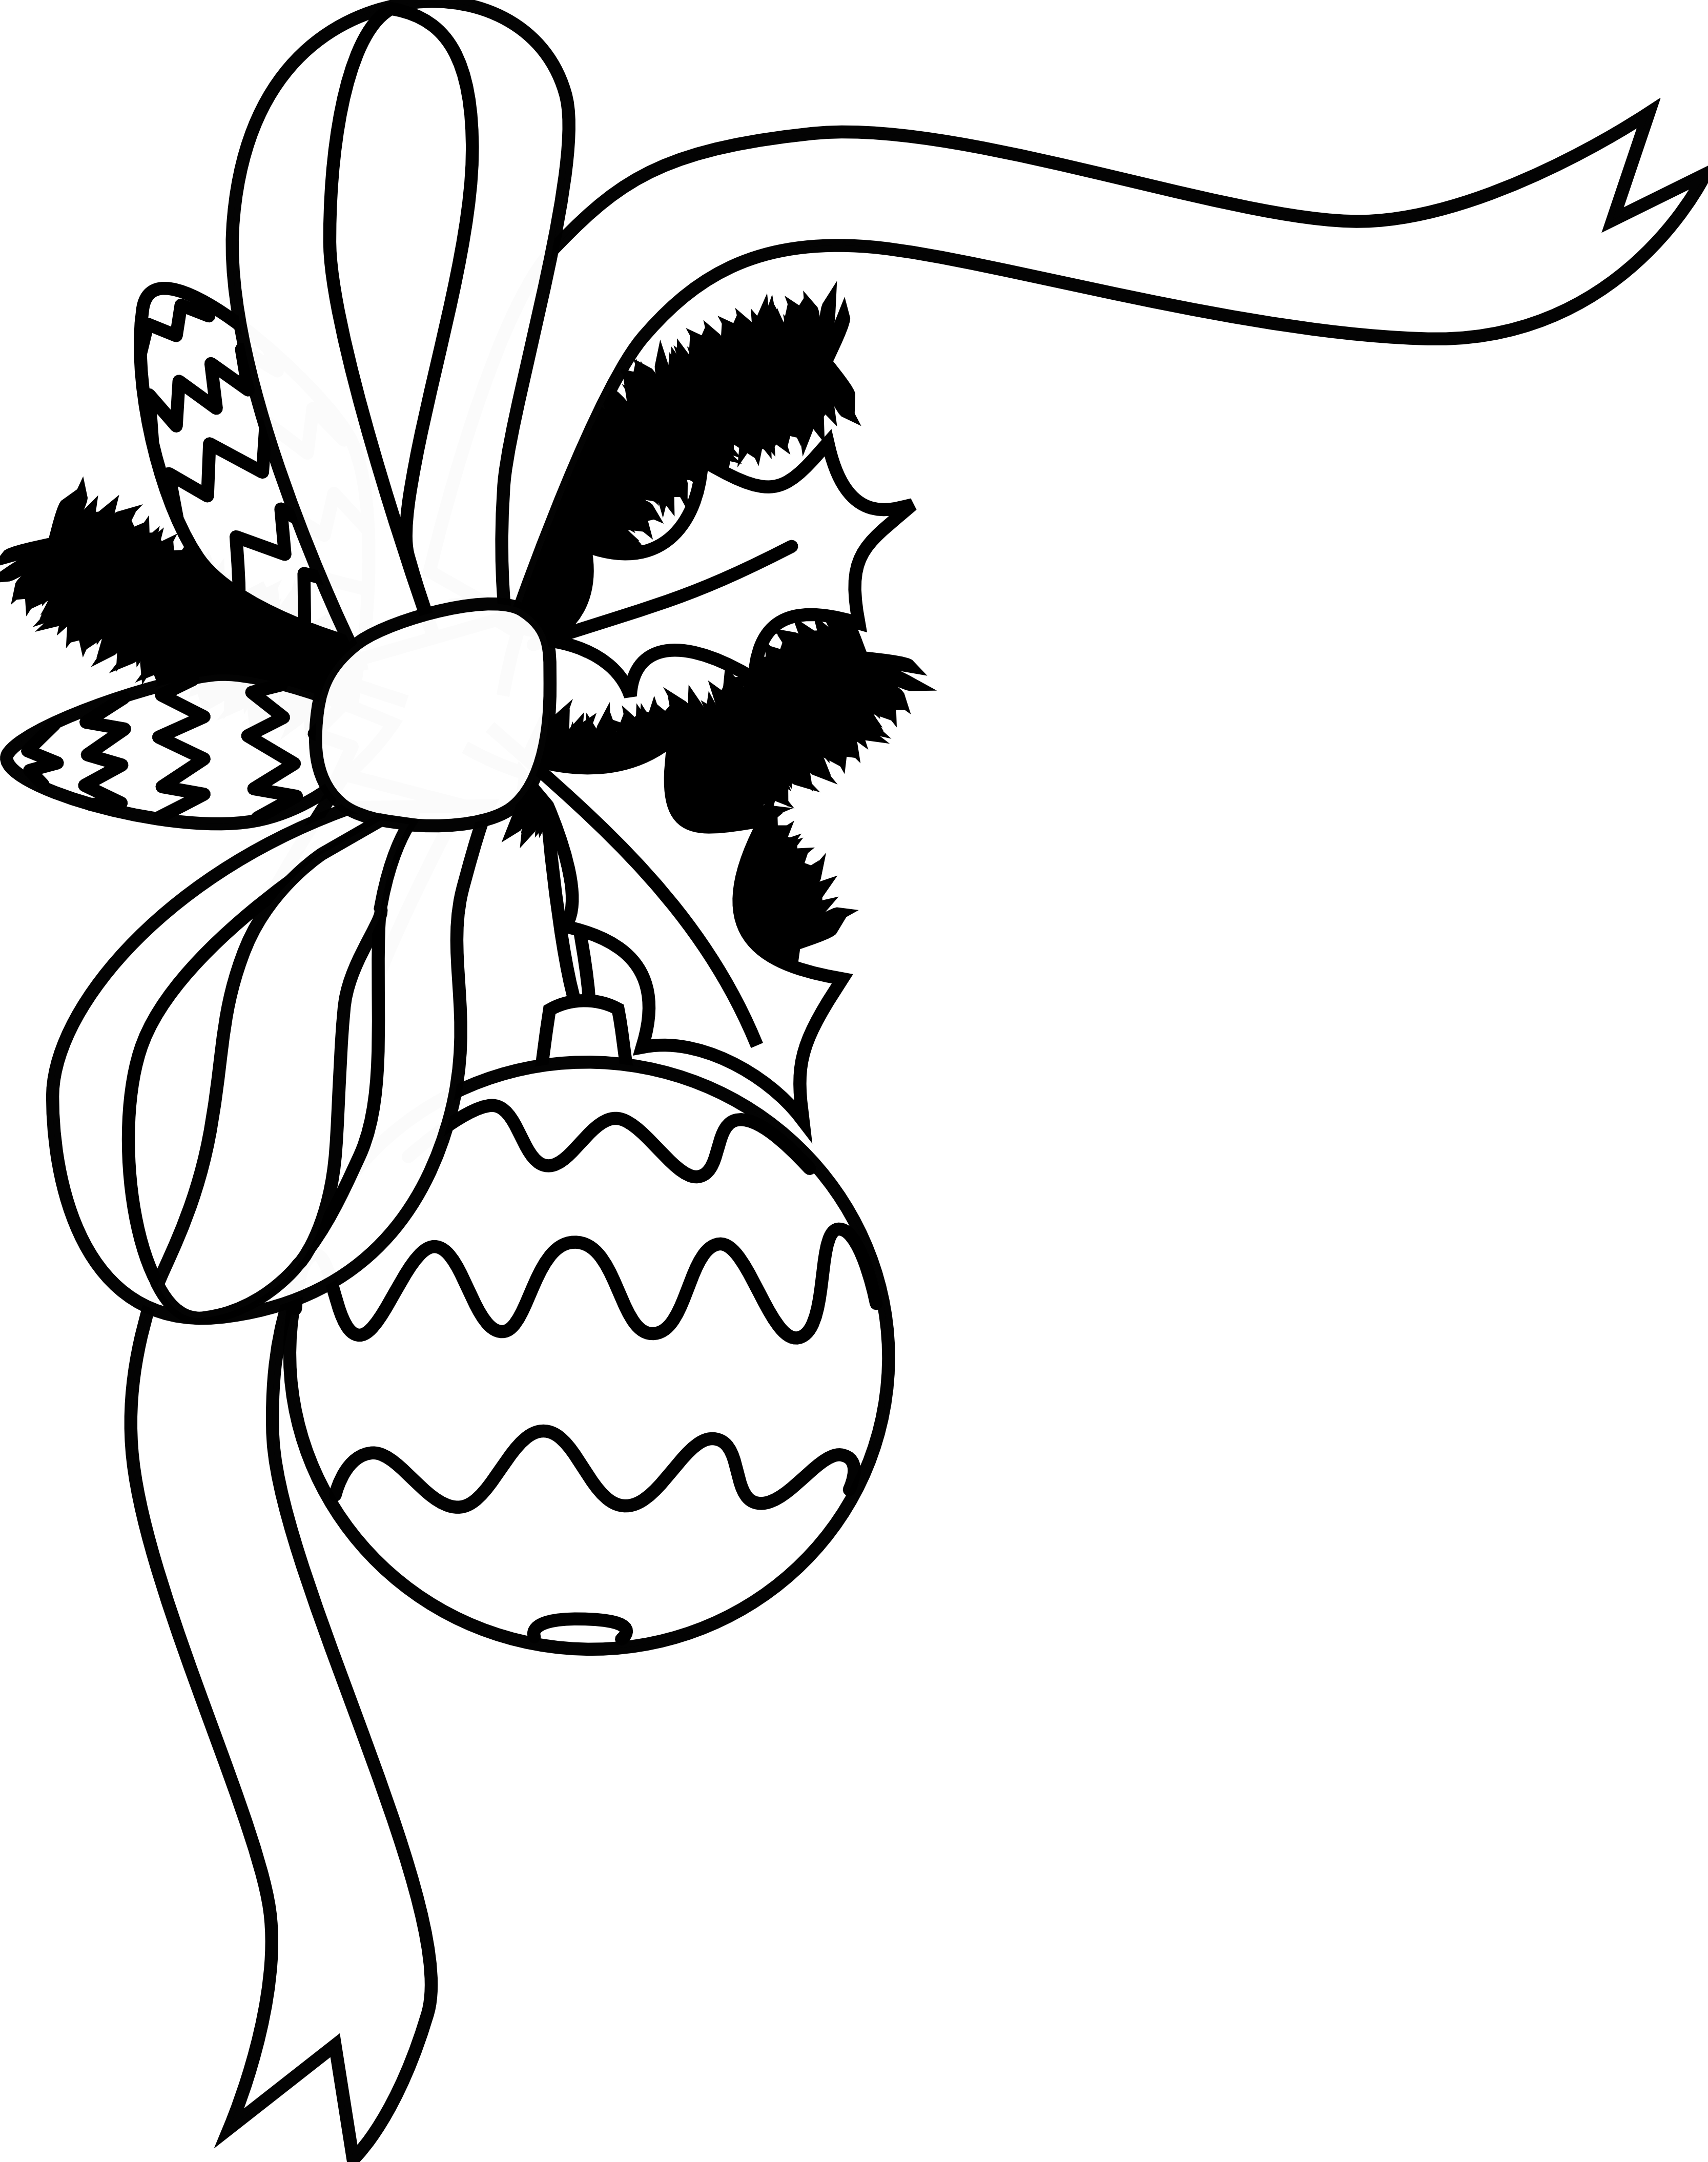 Walrus clipart black and white. Free christmas images download